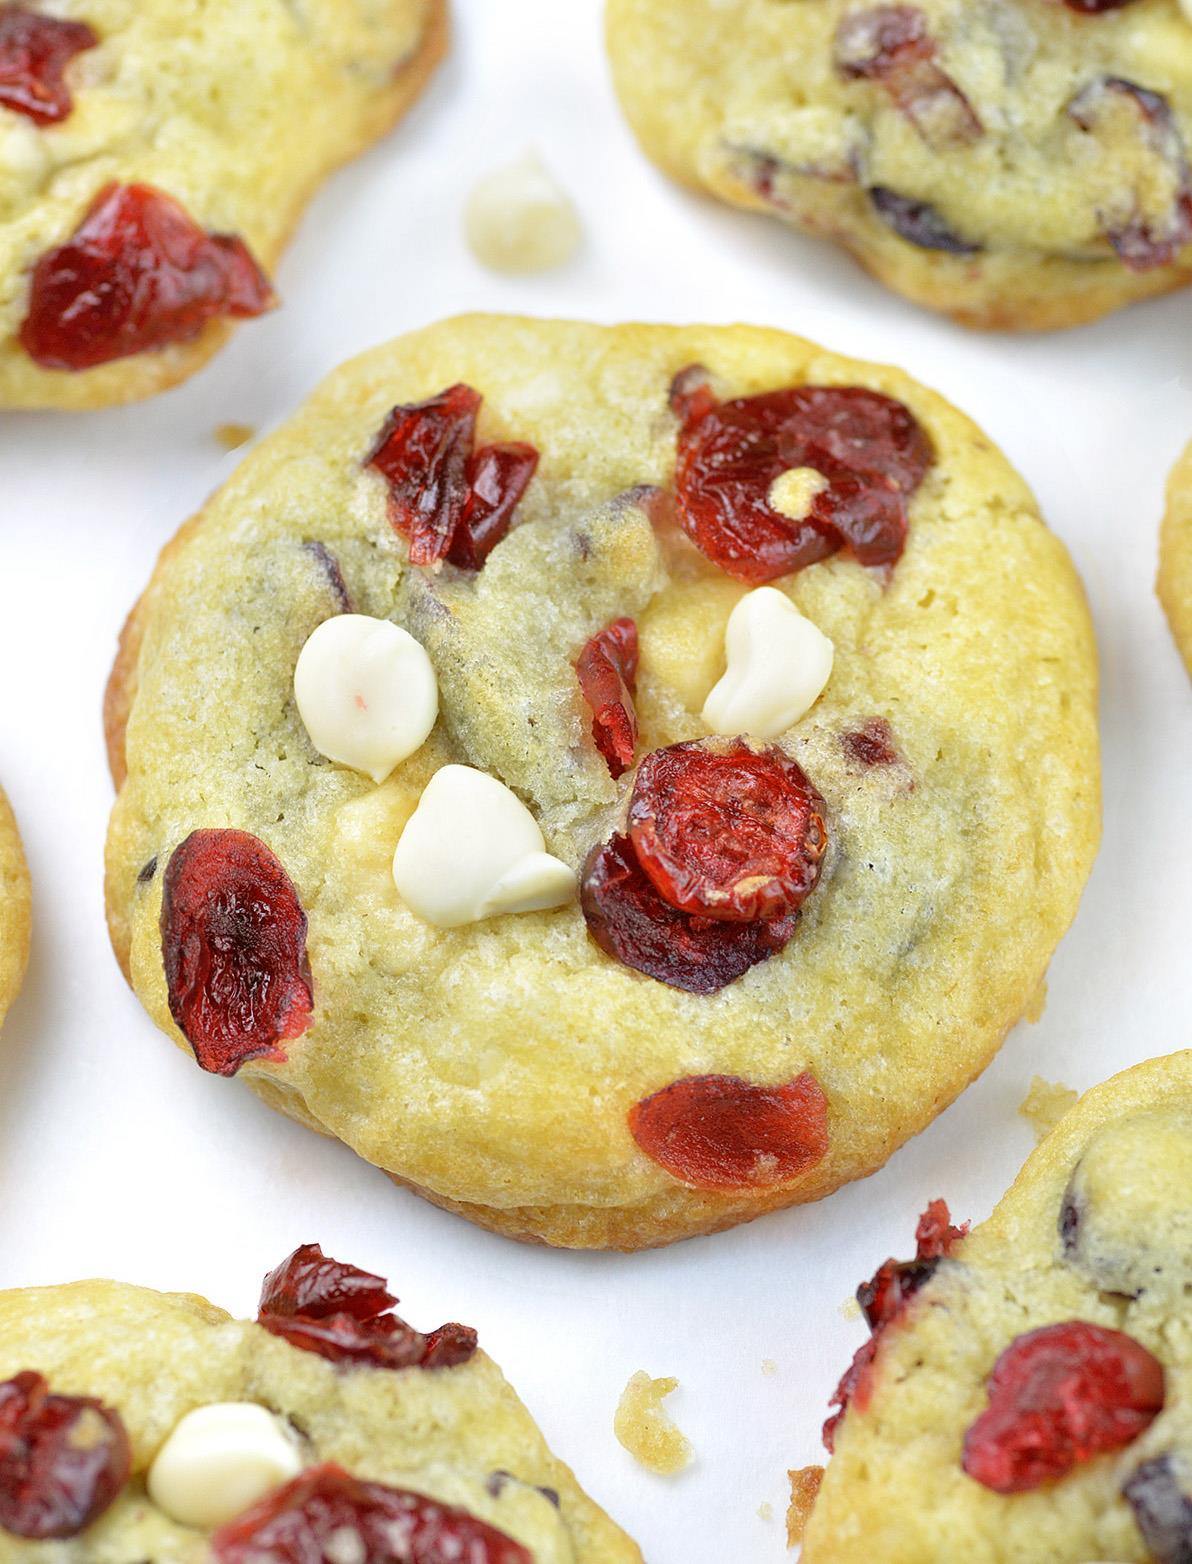 White Chocolate Cranberry Cookies - imagine a bunch of sweet and tangy dried red cranberries and white chocolate chunks held together with rich and buttery cookie dough. WOW!